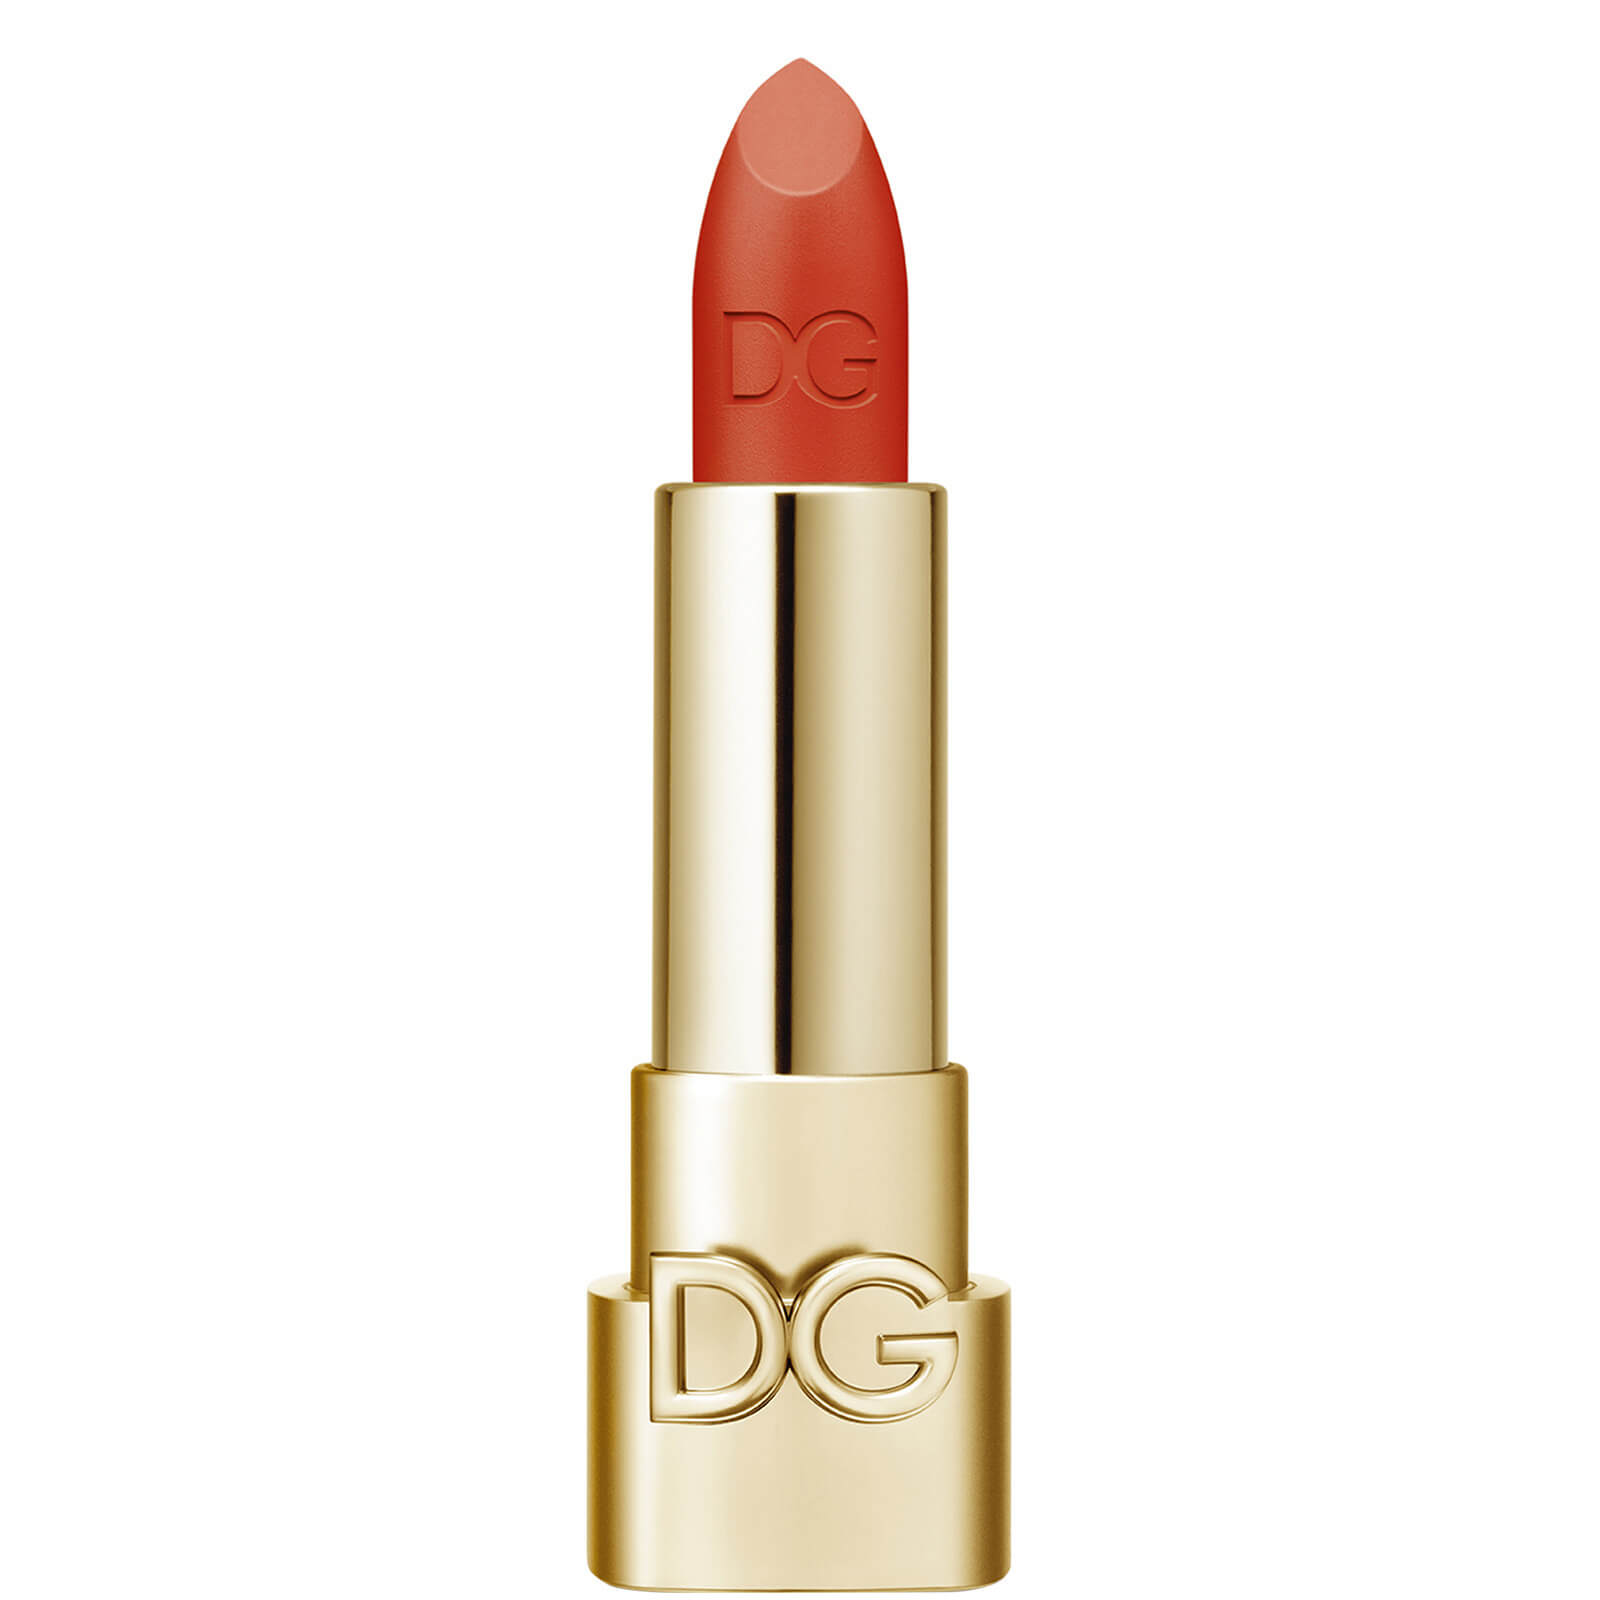 dolce&gabbana the only one matte lipstick 3.5g (various shades) - coral sunrise